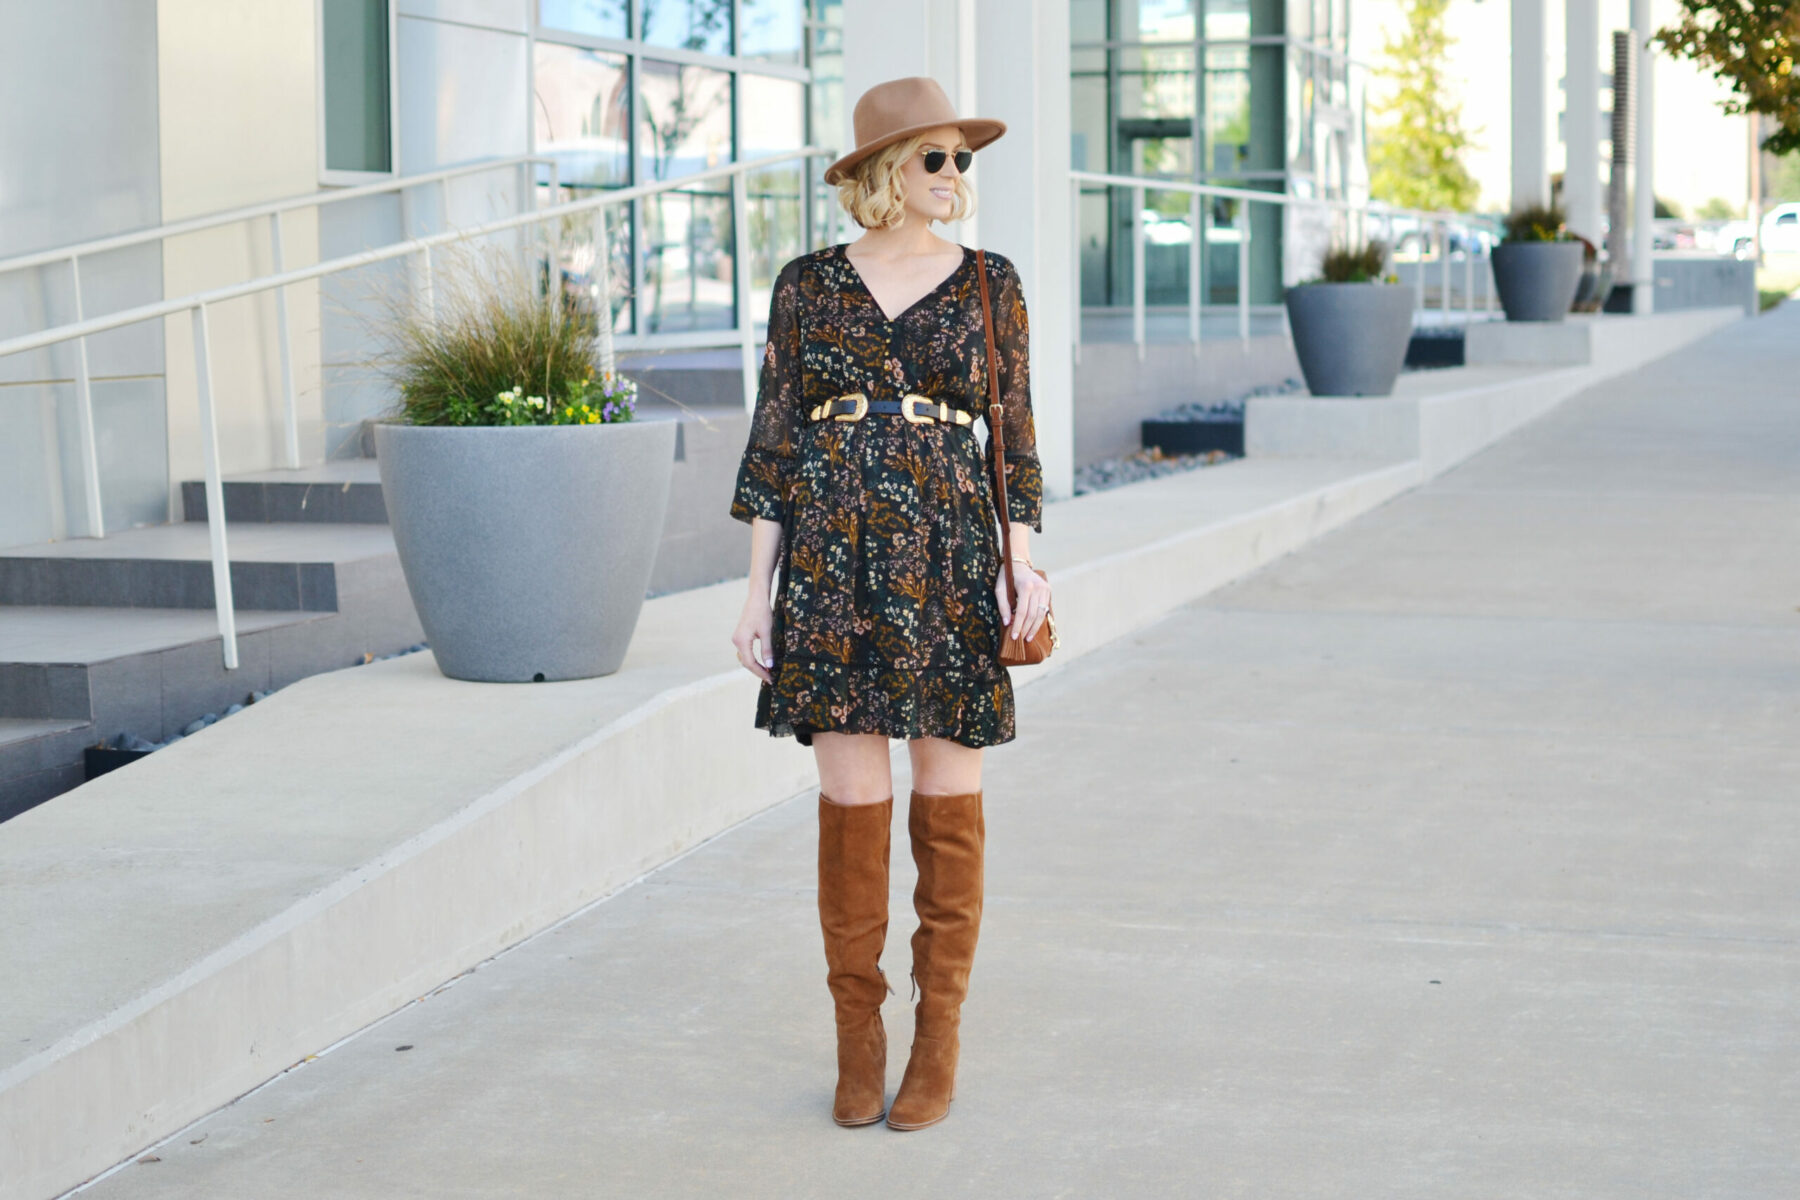 bohemian attire with boots